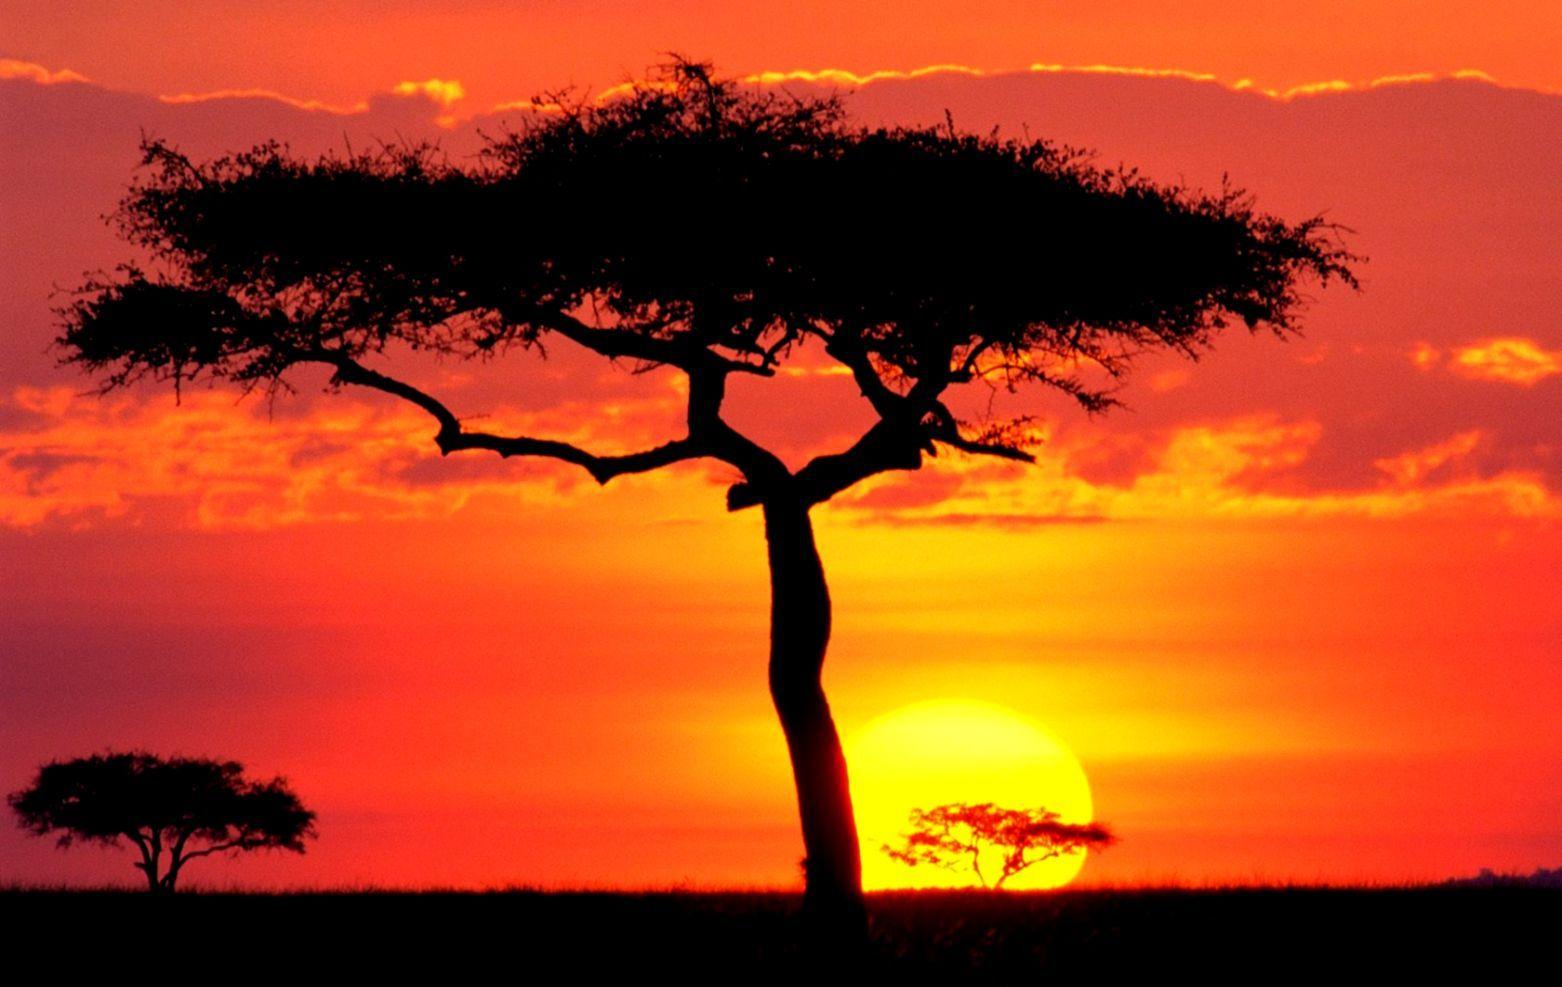 African Sunset Wallpapers Top Free African Sunset Backgrounds Wallpaperaccess 1293